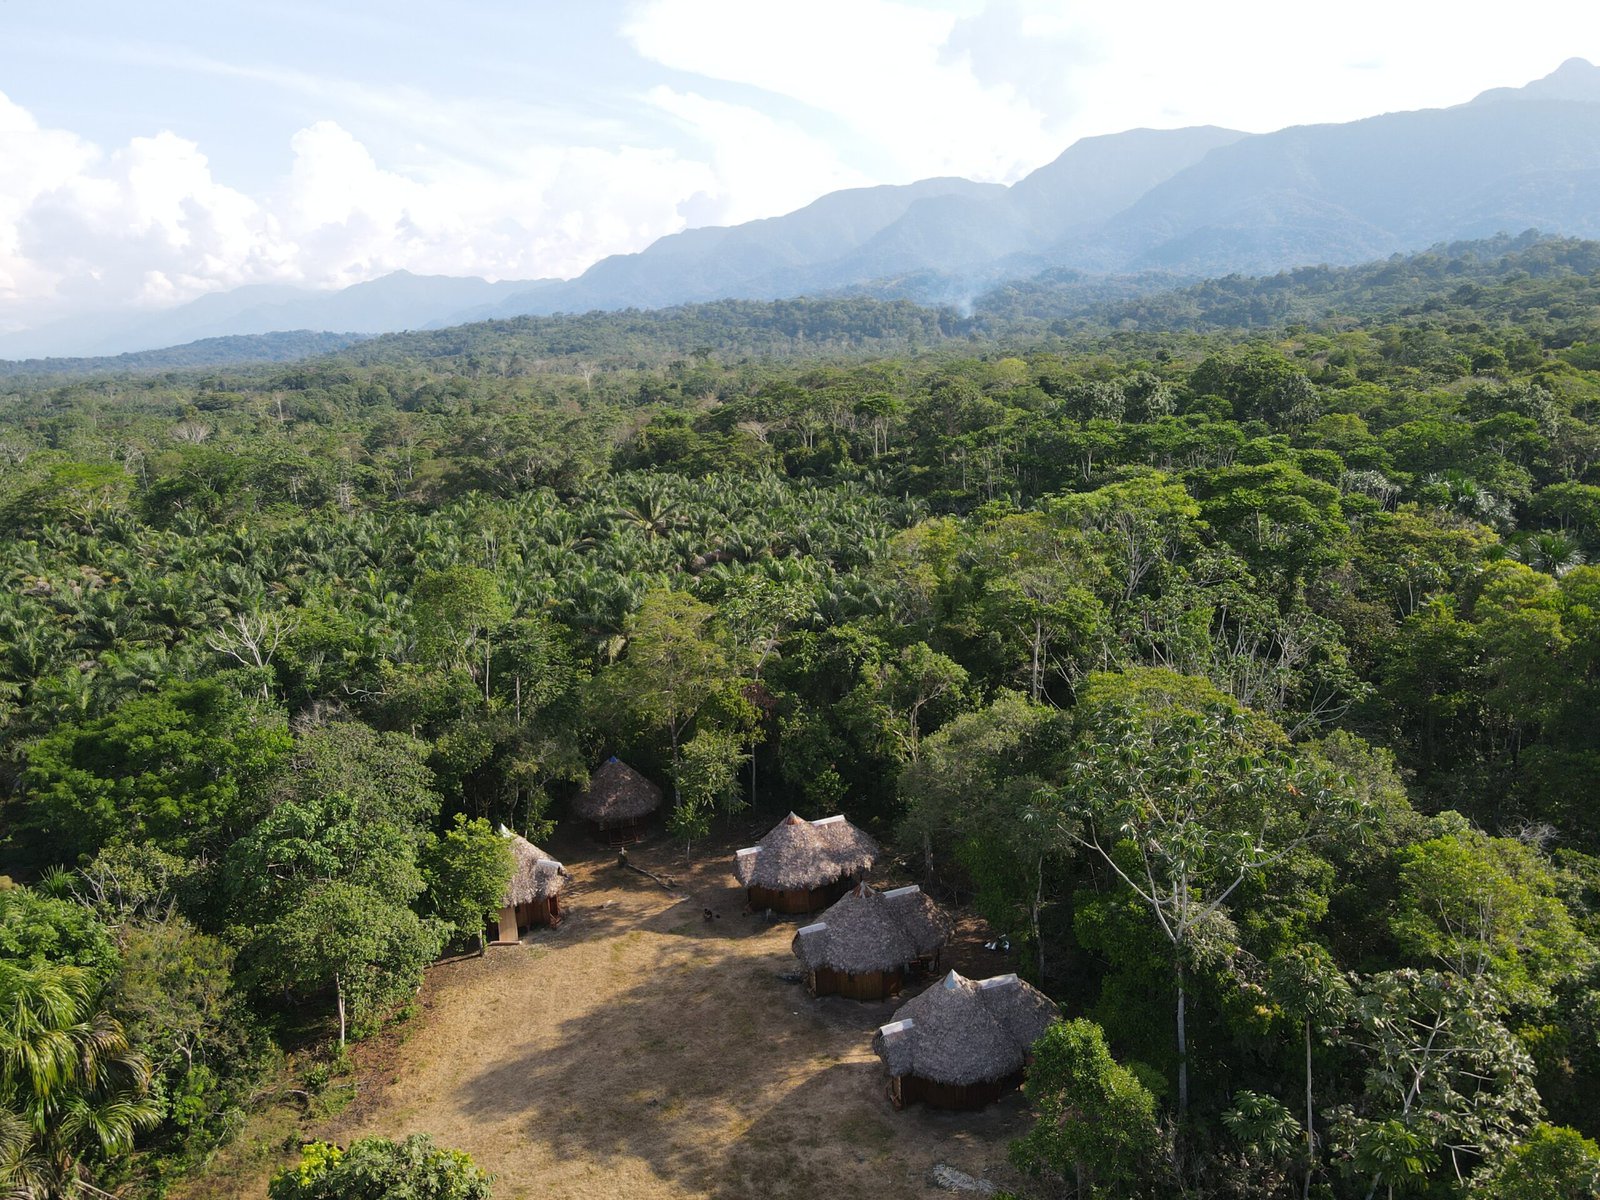 Ecotourism huts in the Yamino community.